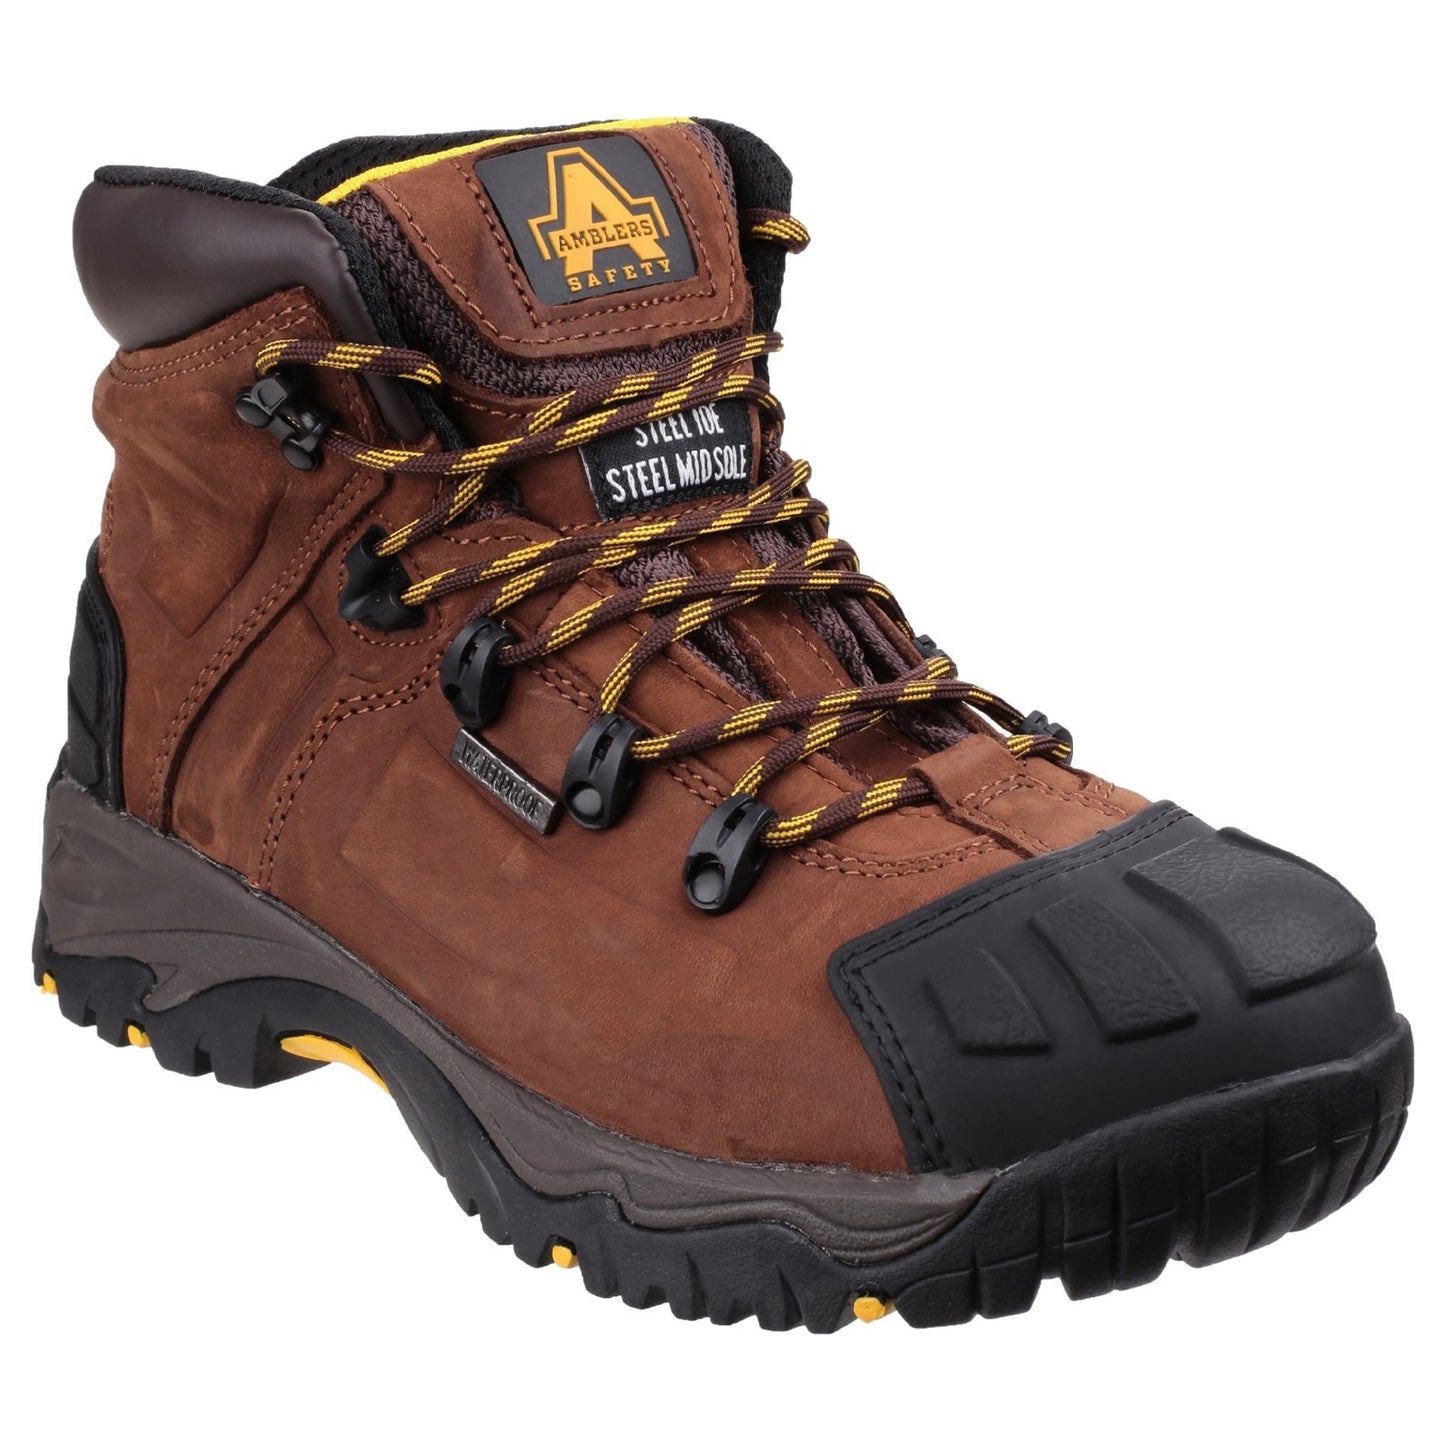 FS39 Safety Boot, Amblers Safety